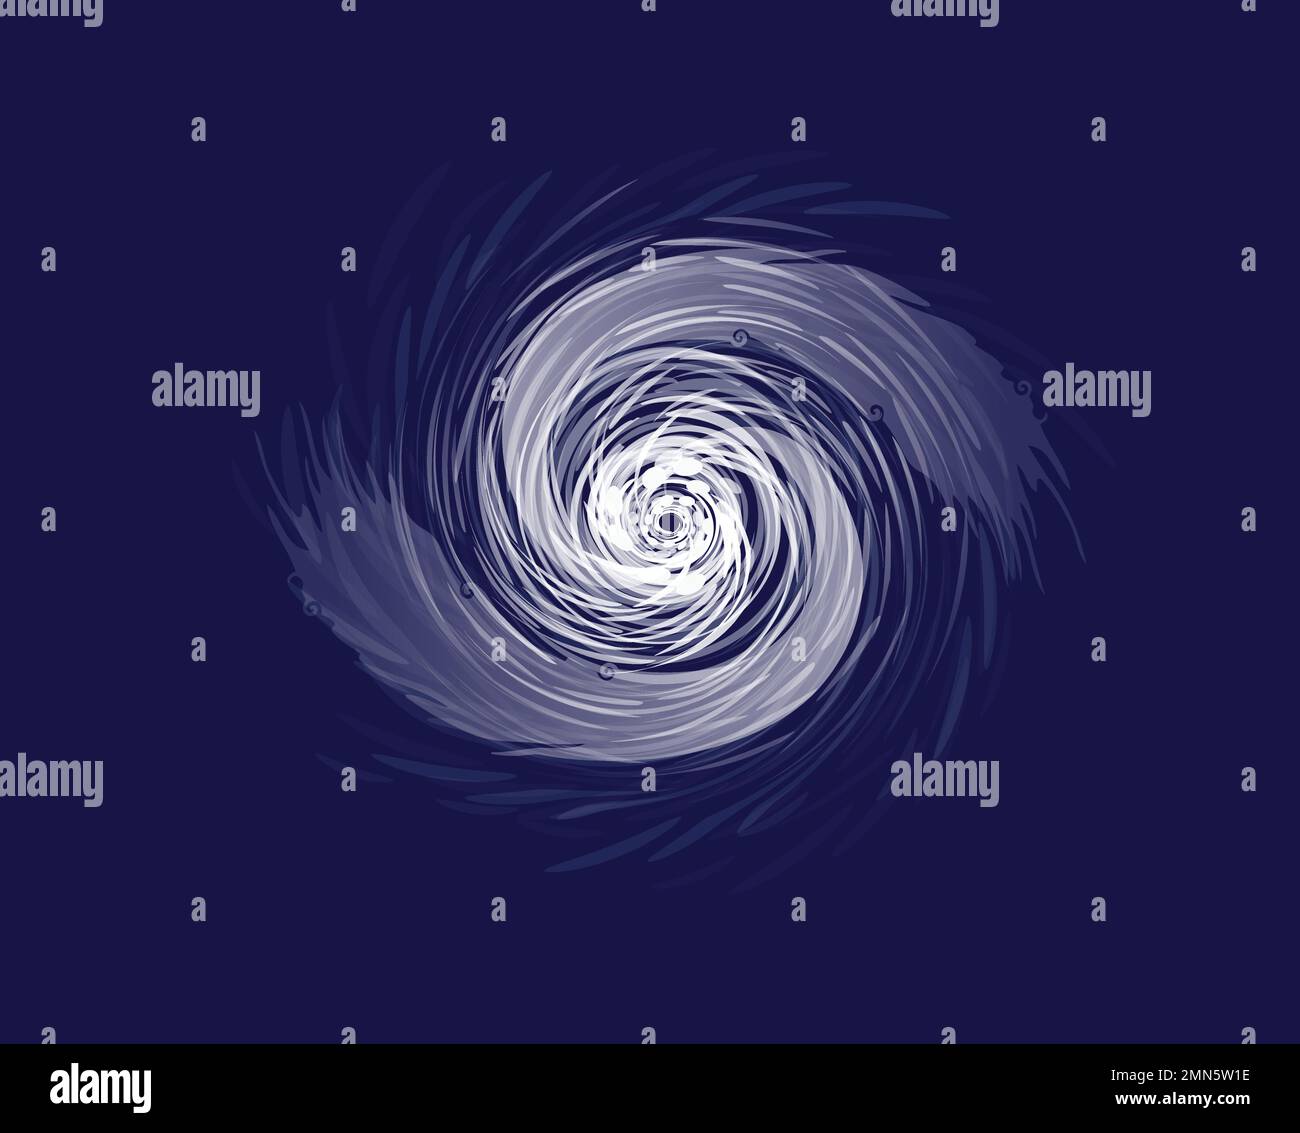 Hurricane funnel. Cyclonic weather whirlpool of climatic vortices Stock Vector